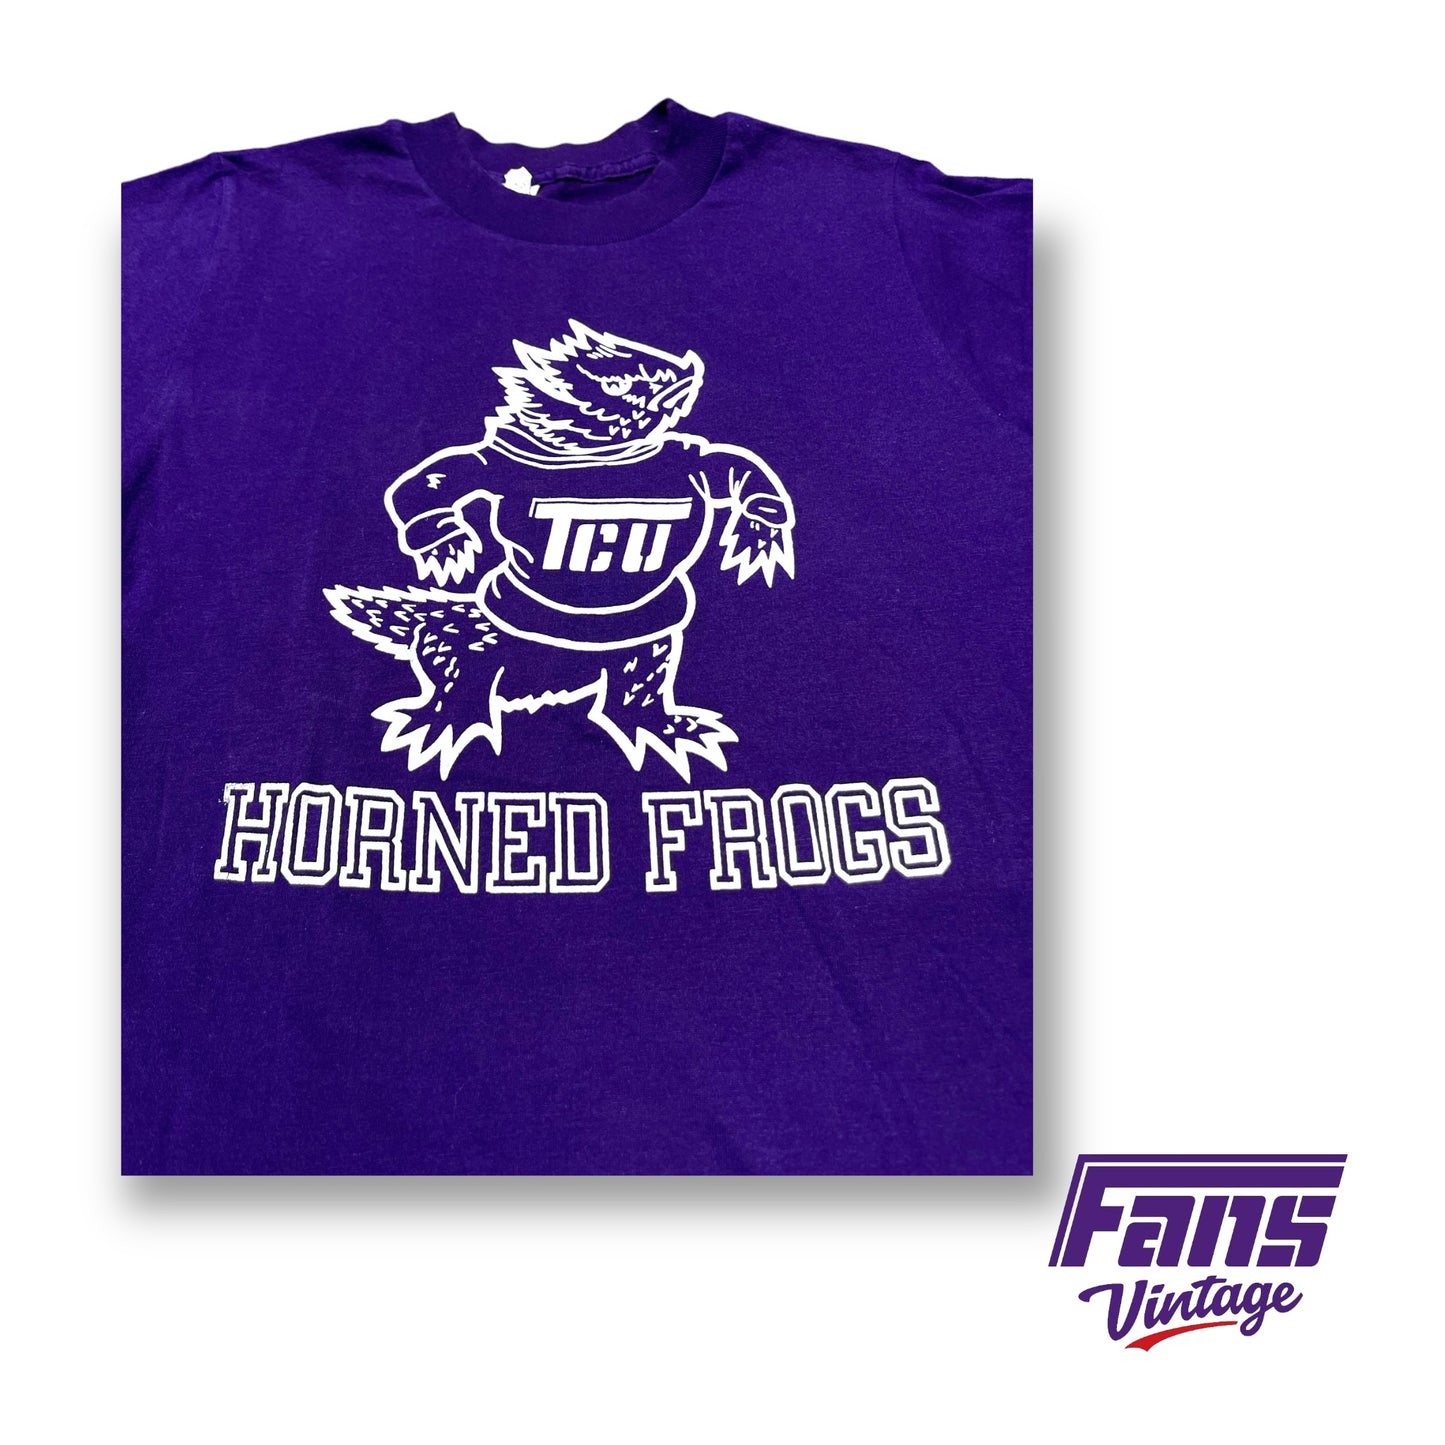 RARE TCU “GRAIL” - Mint Condition Vintage TCU Shirt with double-sided Flying T Sweater Frog Logo